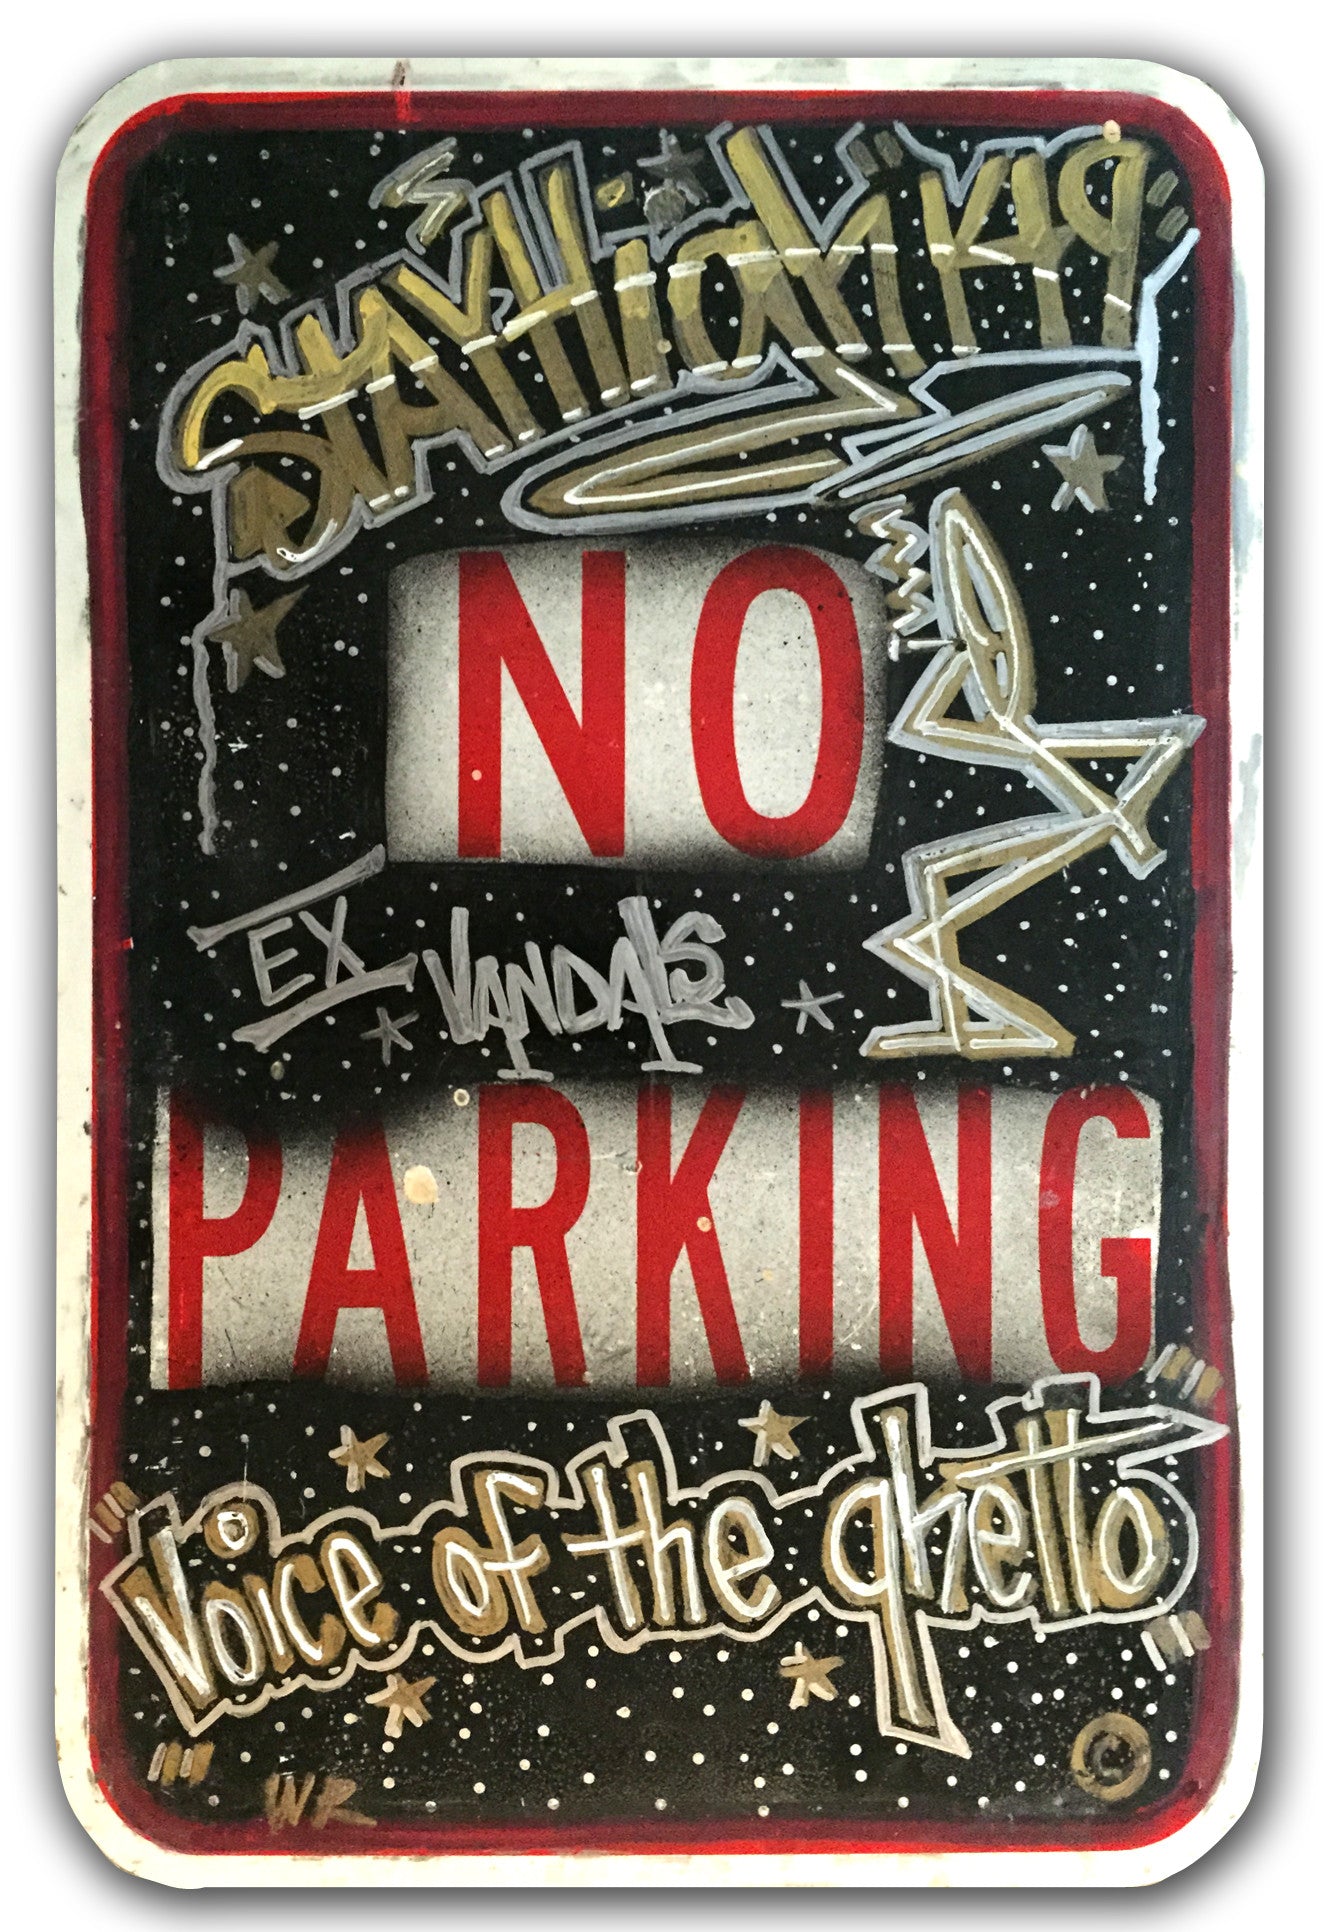 STAYHIGH 149 - "No Parking" Painting on metal